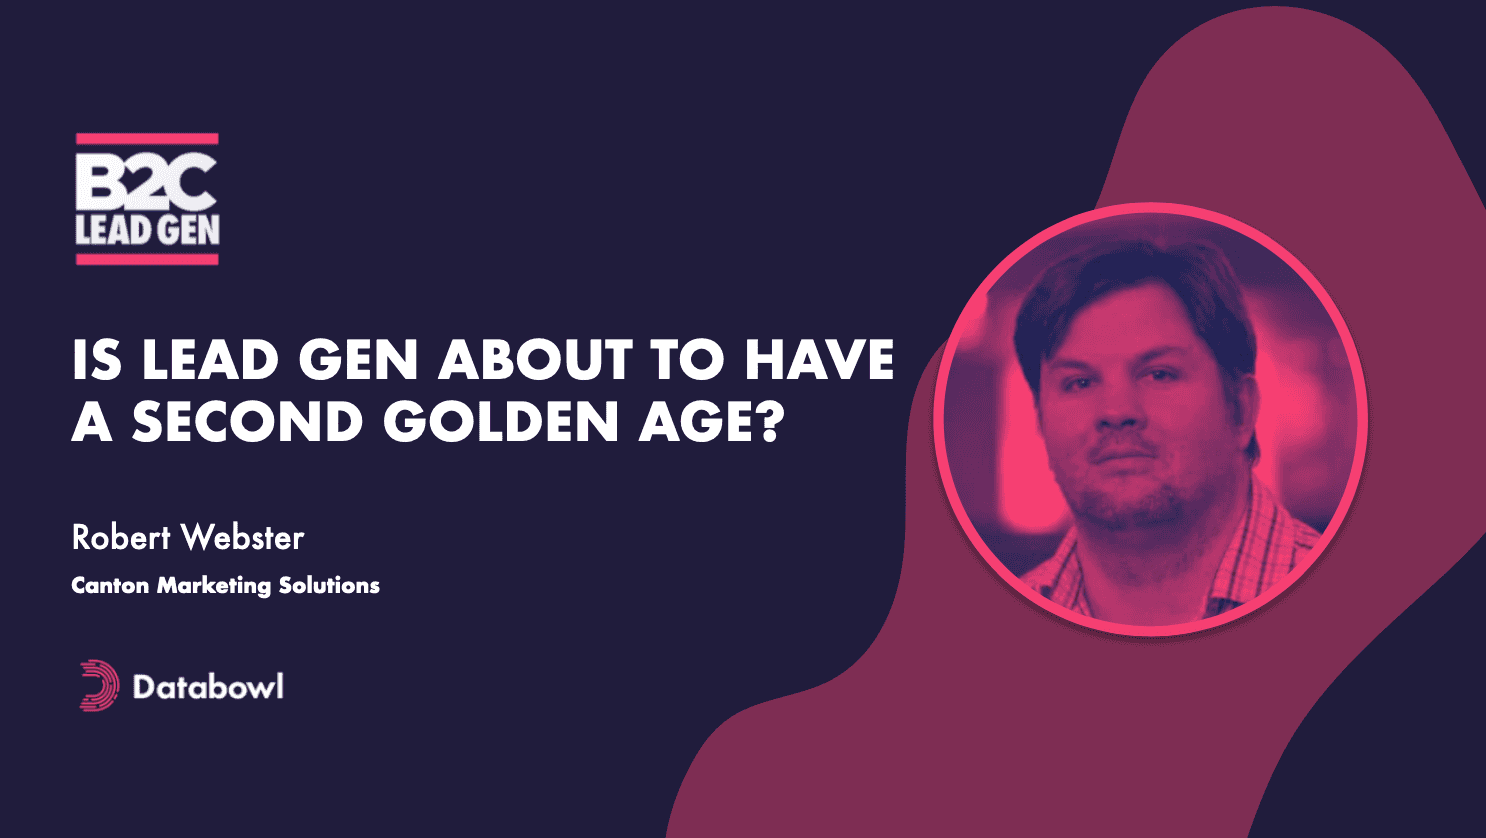 Is Lead Gen About To Have a Second Golden Age?